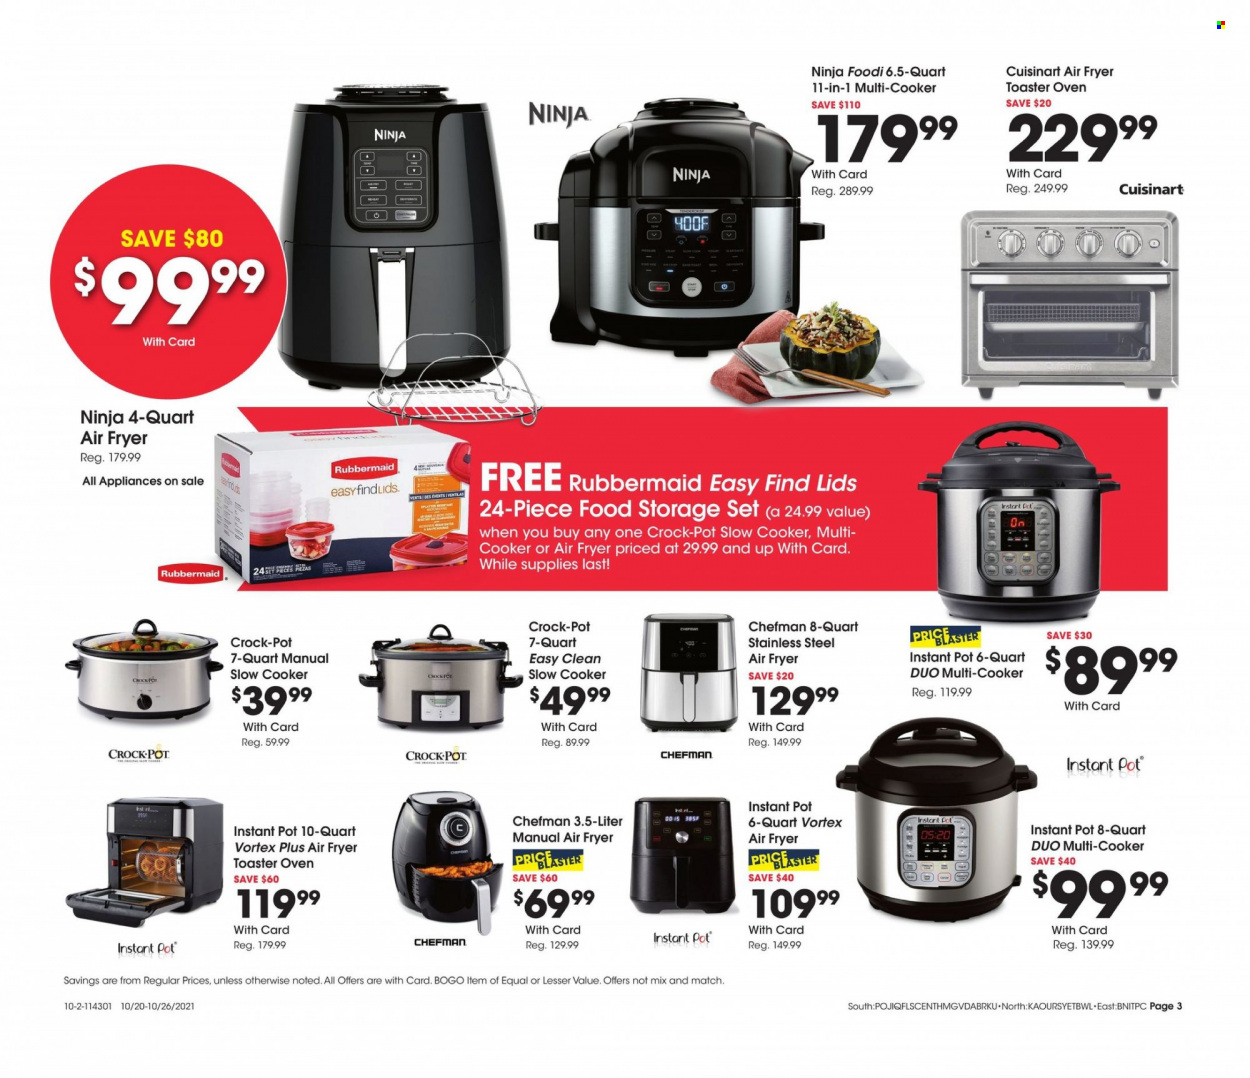 Fred Meyer ad  - 10.20.2021 - 10.26.2021.